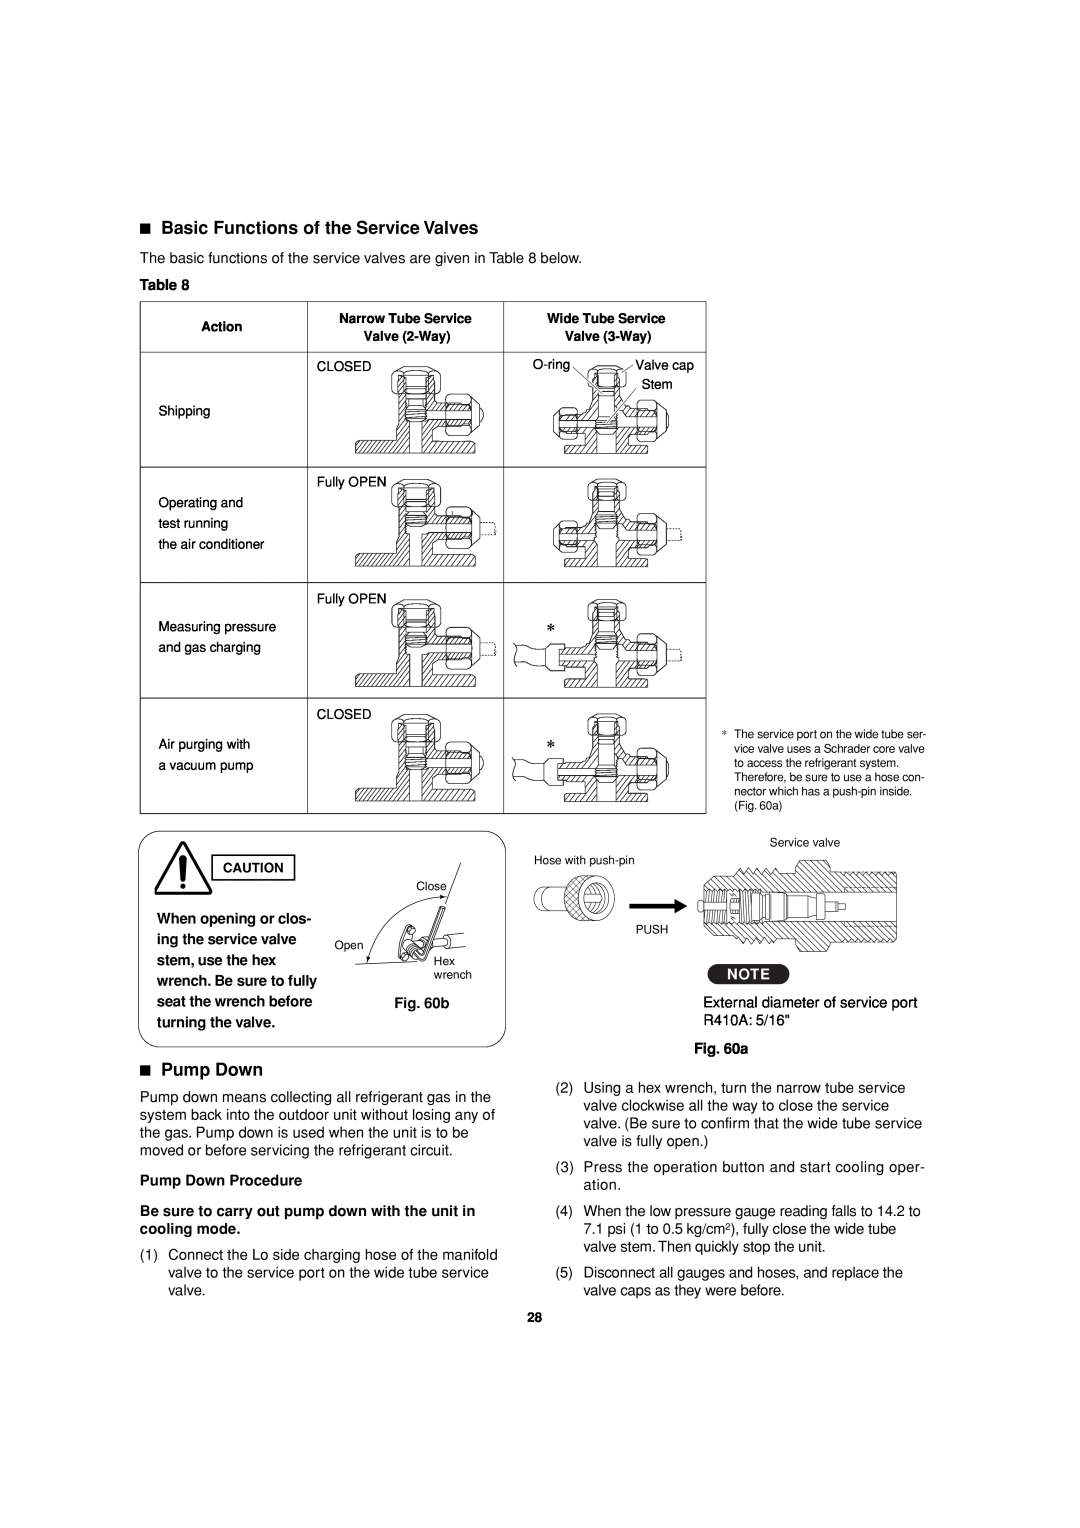 Sanyo C3082 Basic Functions of the Service Valves, Pump Down, When opening or clos, ing the service valve, b, R410A 5/16 